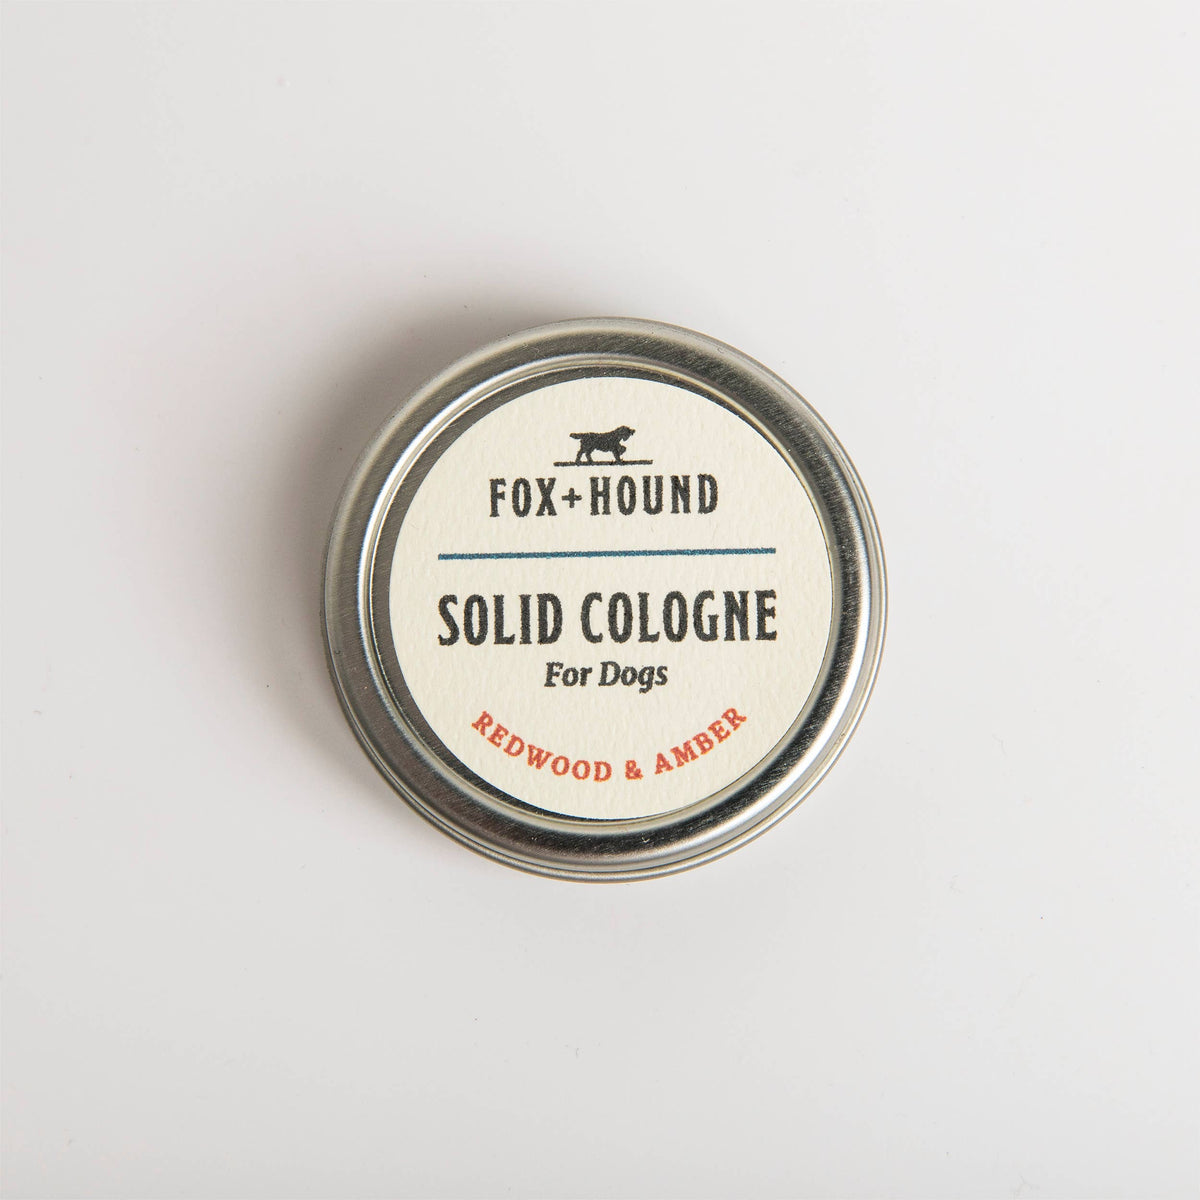 A closed tin of Fox + Hound Redwood and Amber Solid Dog Cologne, displayed on a white background.